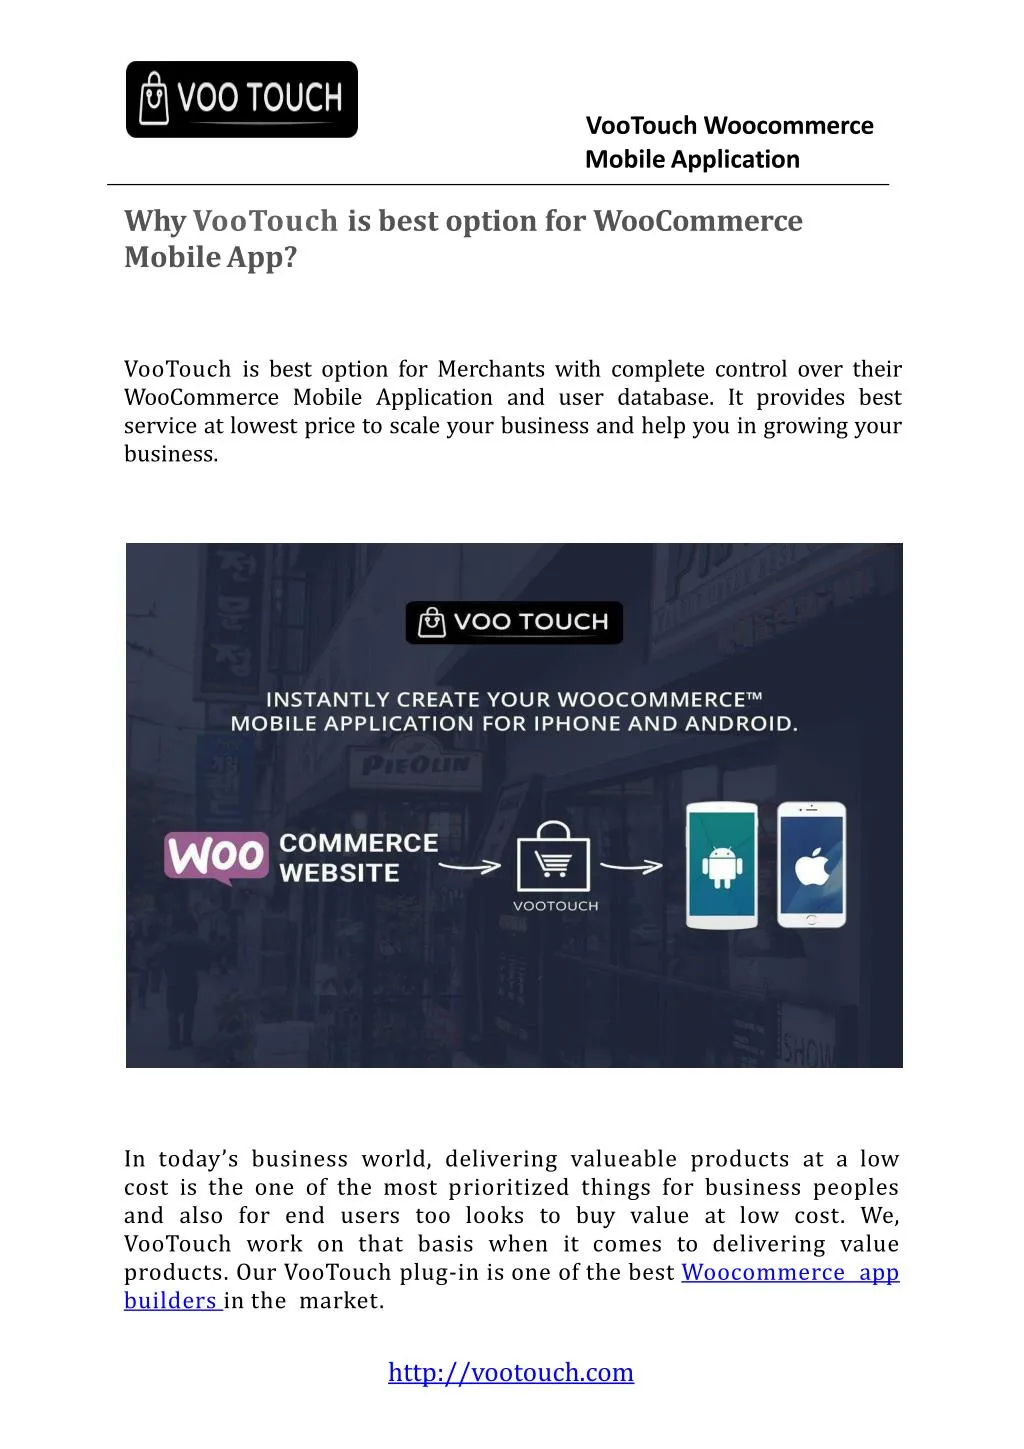 vootouch woocommerce mobile application